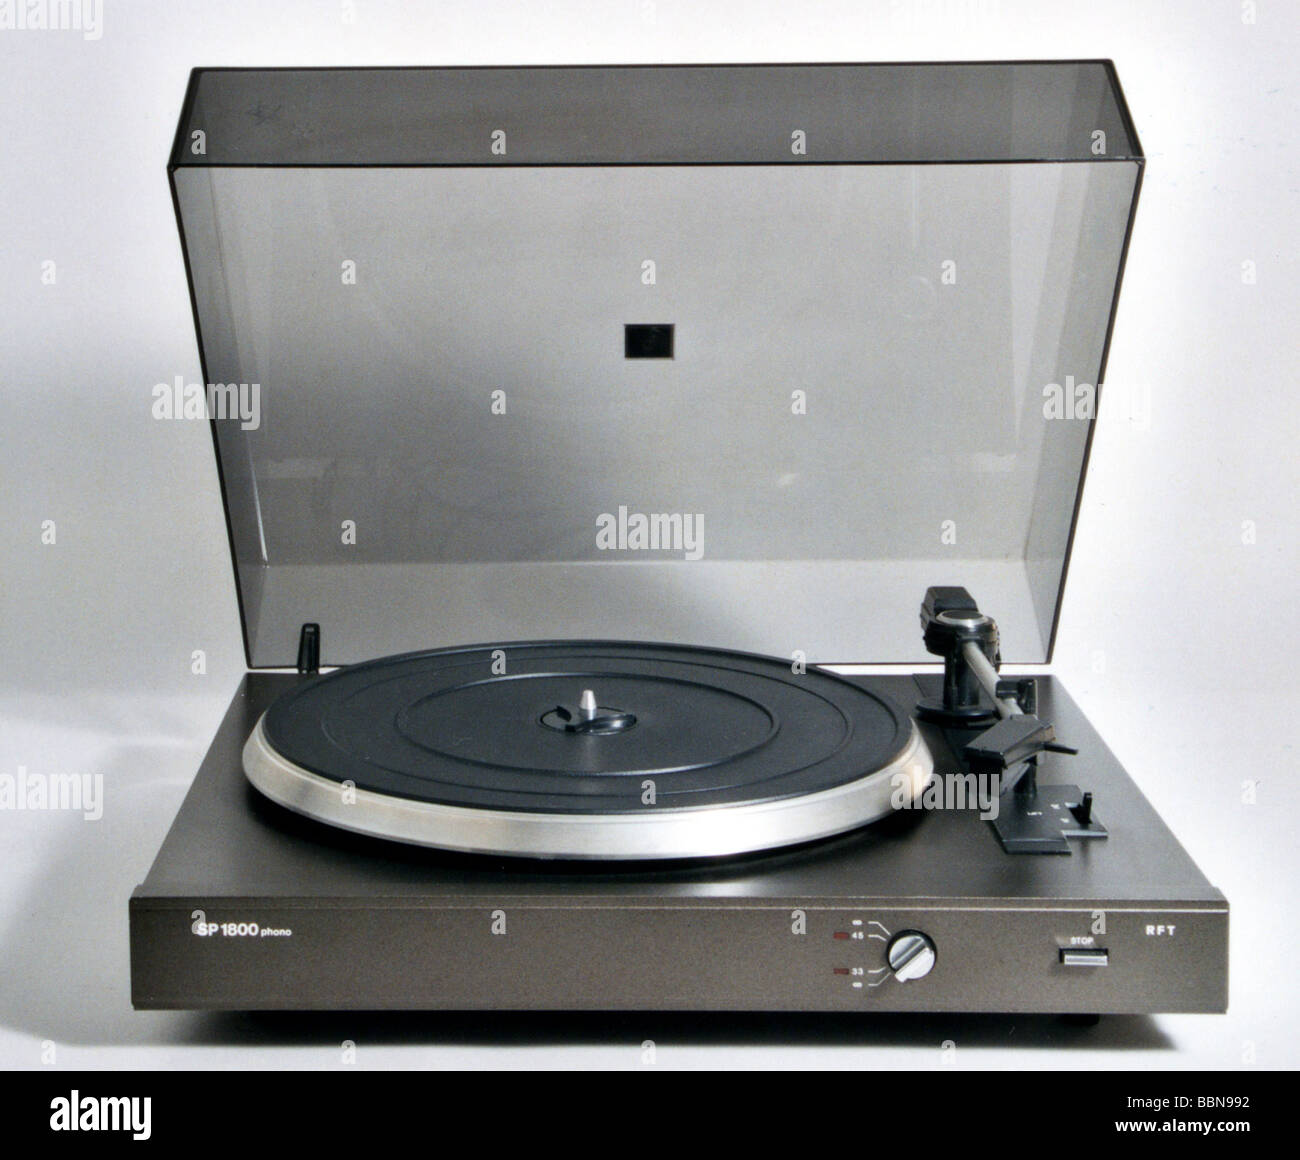 technics, full automatic stereo record player SP 1800, made by VEB Phonotechnik Zittau-Pirna, GDR, 1985, historic, historical, 20th century, East-Germany, East Germany, DDR, sound, audio technic, home electronics, factory design, 1980s, 80s, Zittau, Pirna, Stock Photo